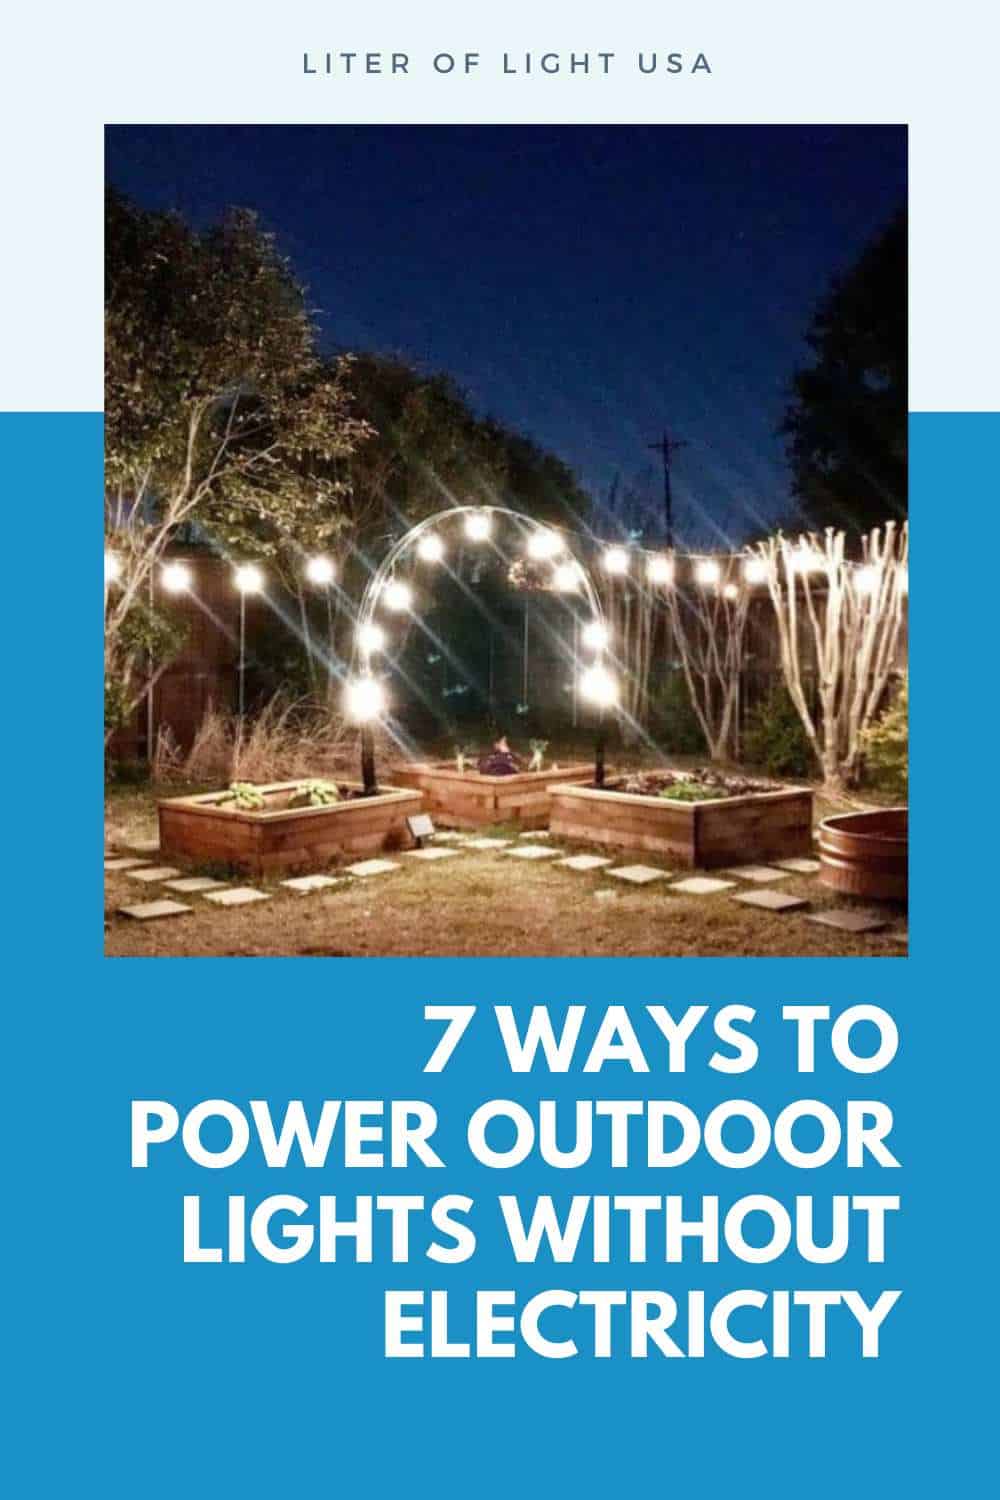 how To Power Outdoor Lights Without Electricity